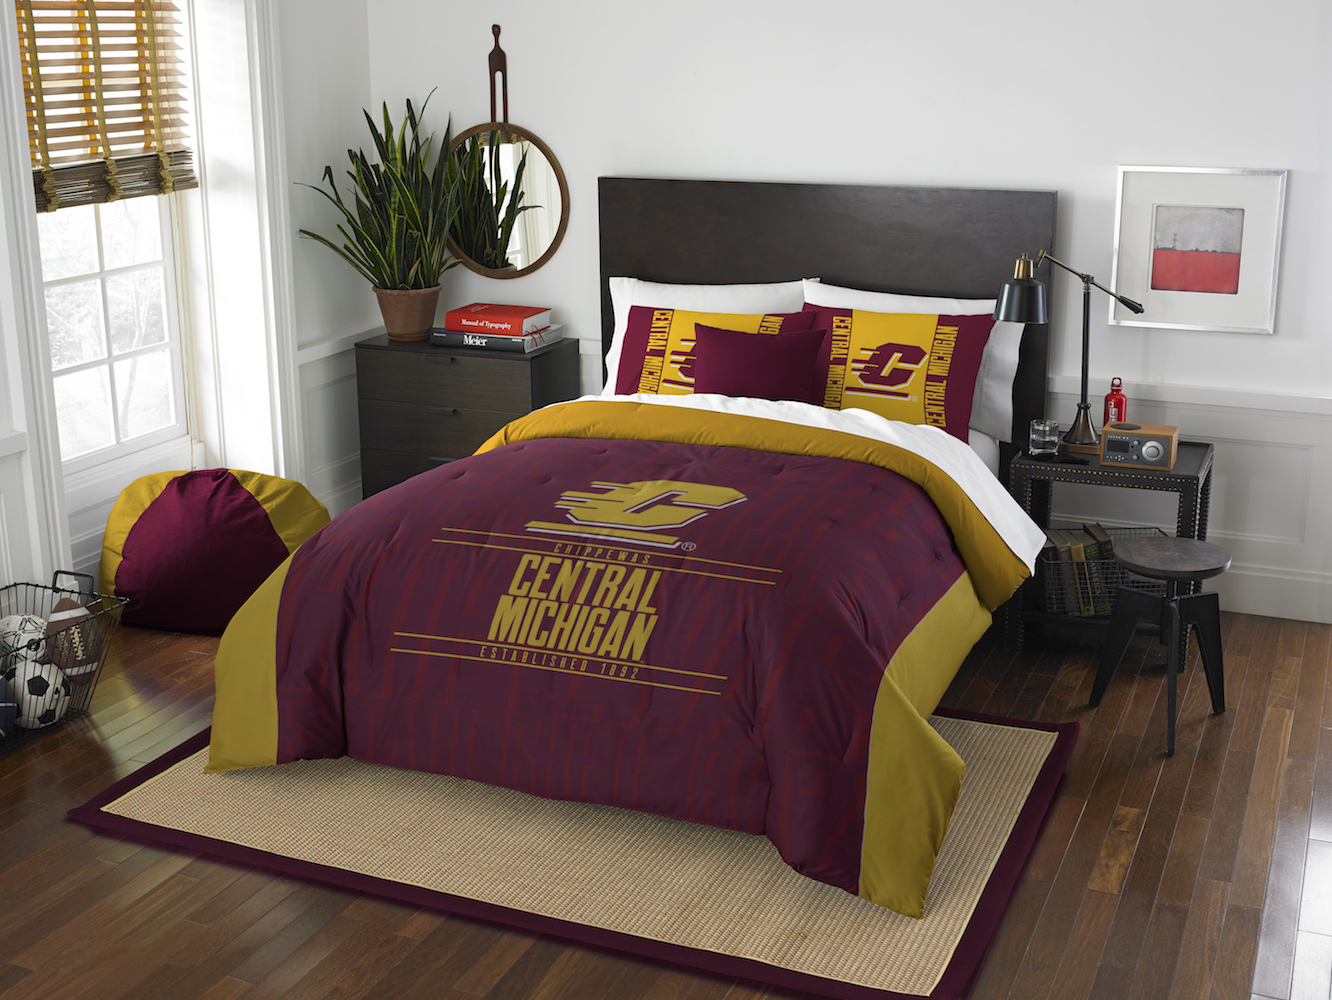 Central Michigan Chippewas QUEEN/FULL size Comforter and 2 Shams